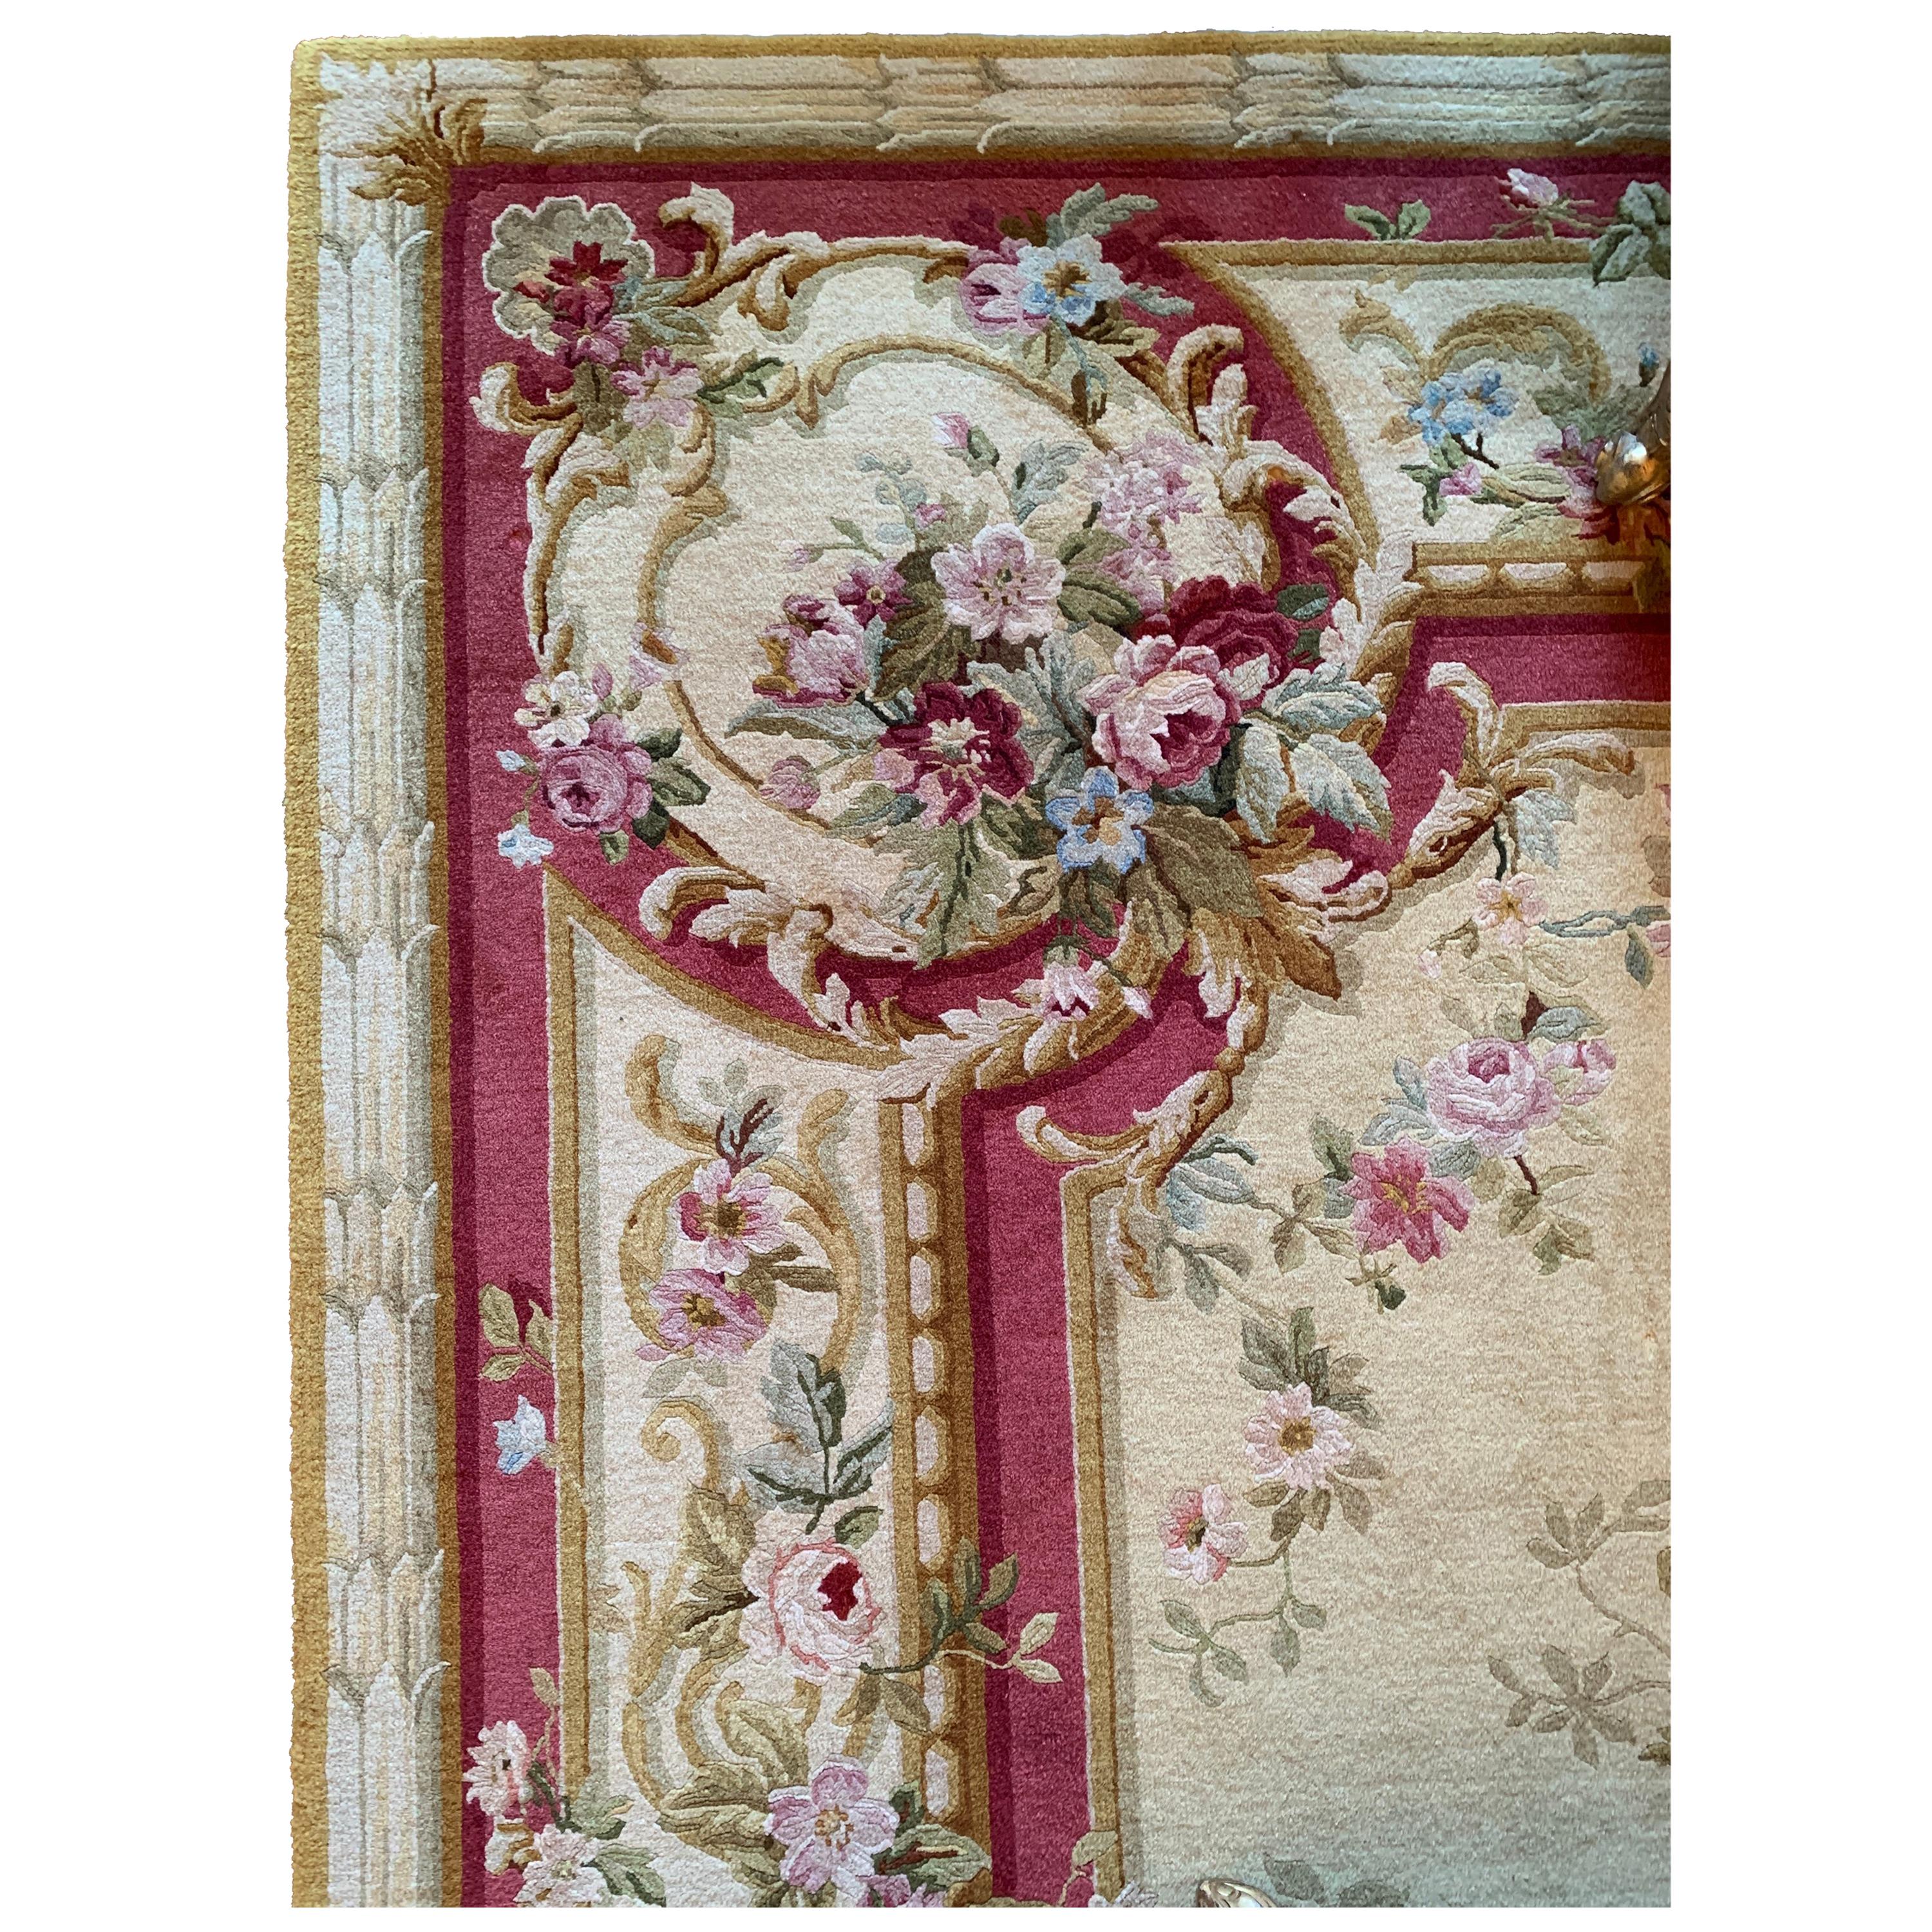 Very Large Handmade 12’ x 15’ French Aubusson or Savonnerie Style Opulent Rug